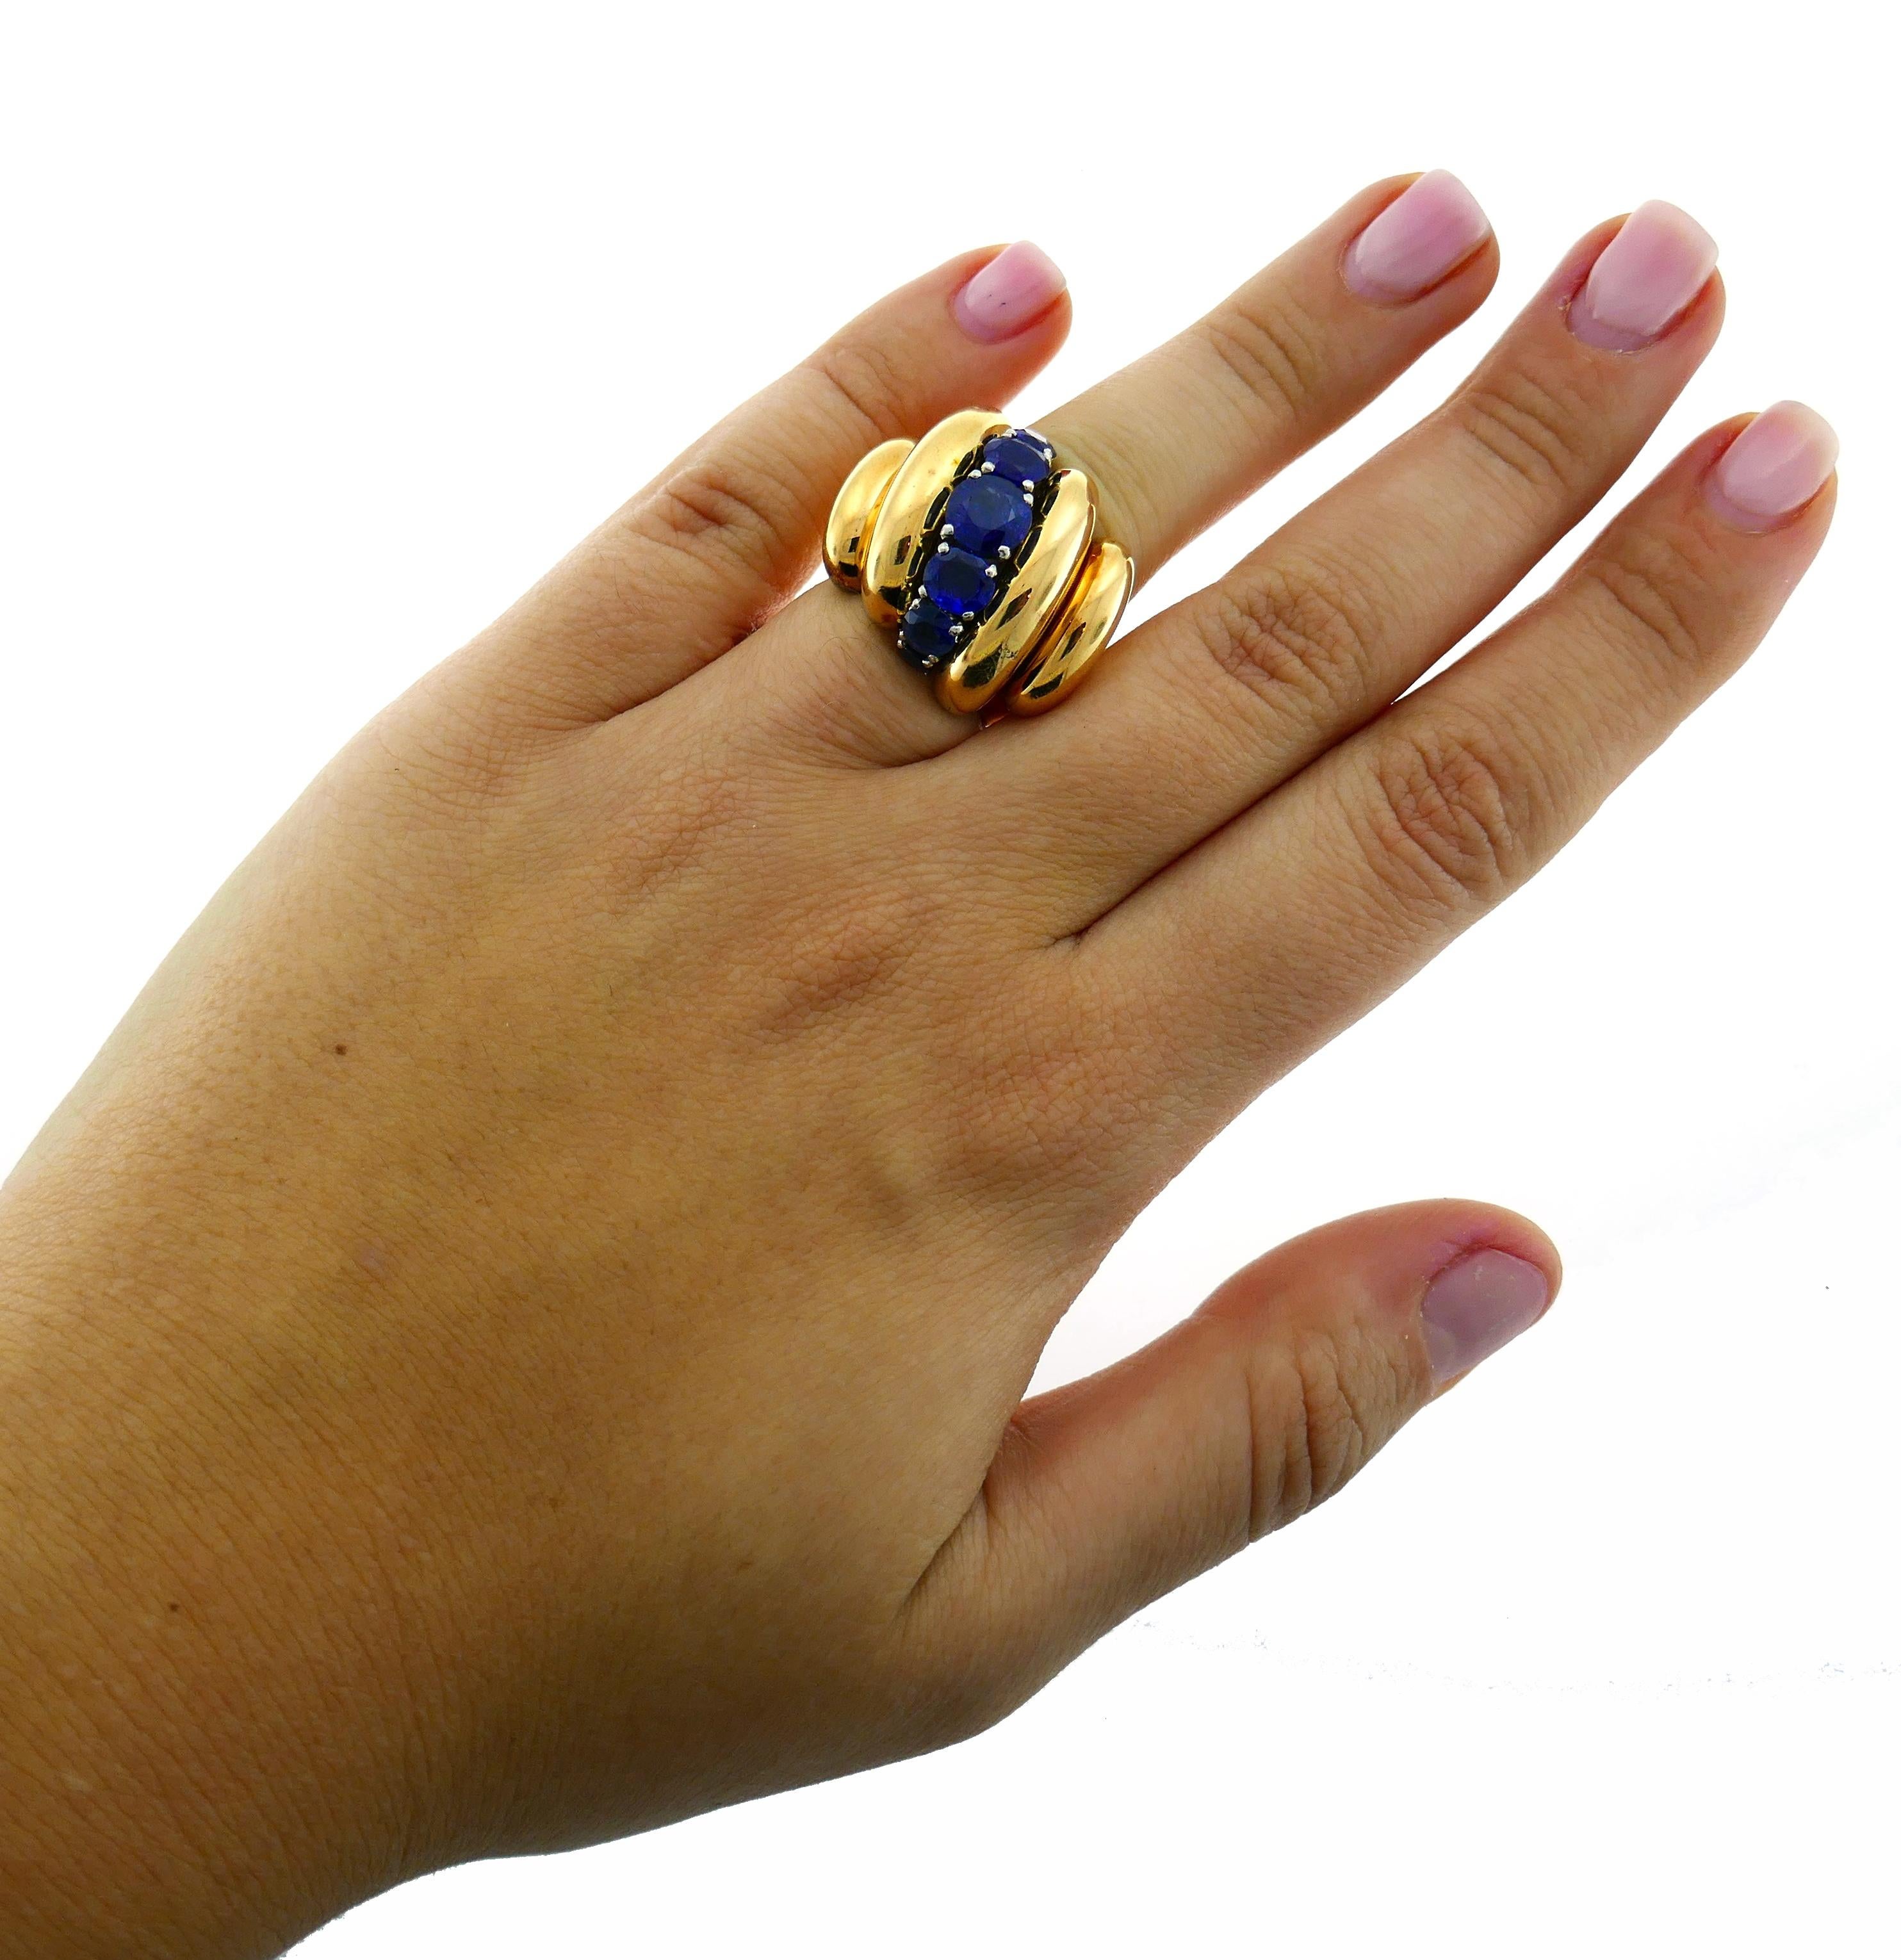 Superb Bombe design cocktail ring created by Van Cleef & Arpels New York in the 1970s. Timeless, chic and wearable, the ring is a great addition to your jewelry collection.
It is made of 14 karat (tested) yellow gold and set with seven oval faceted